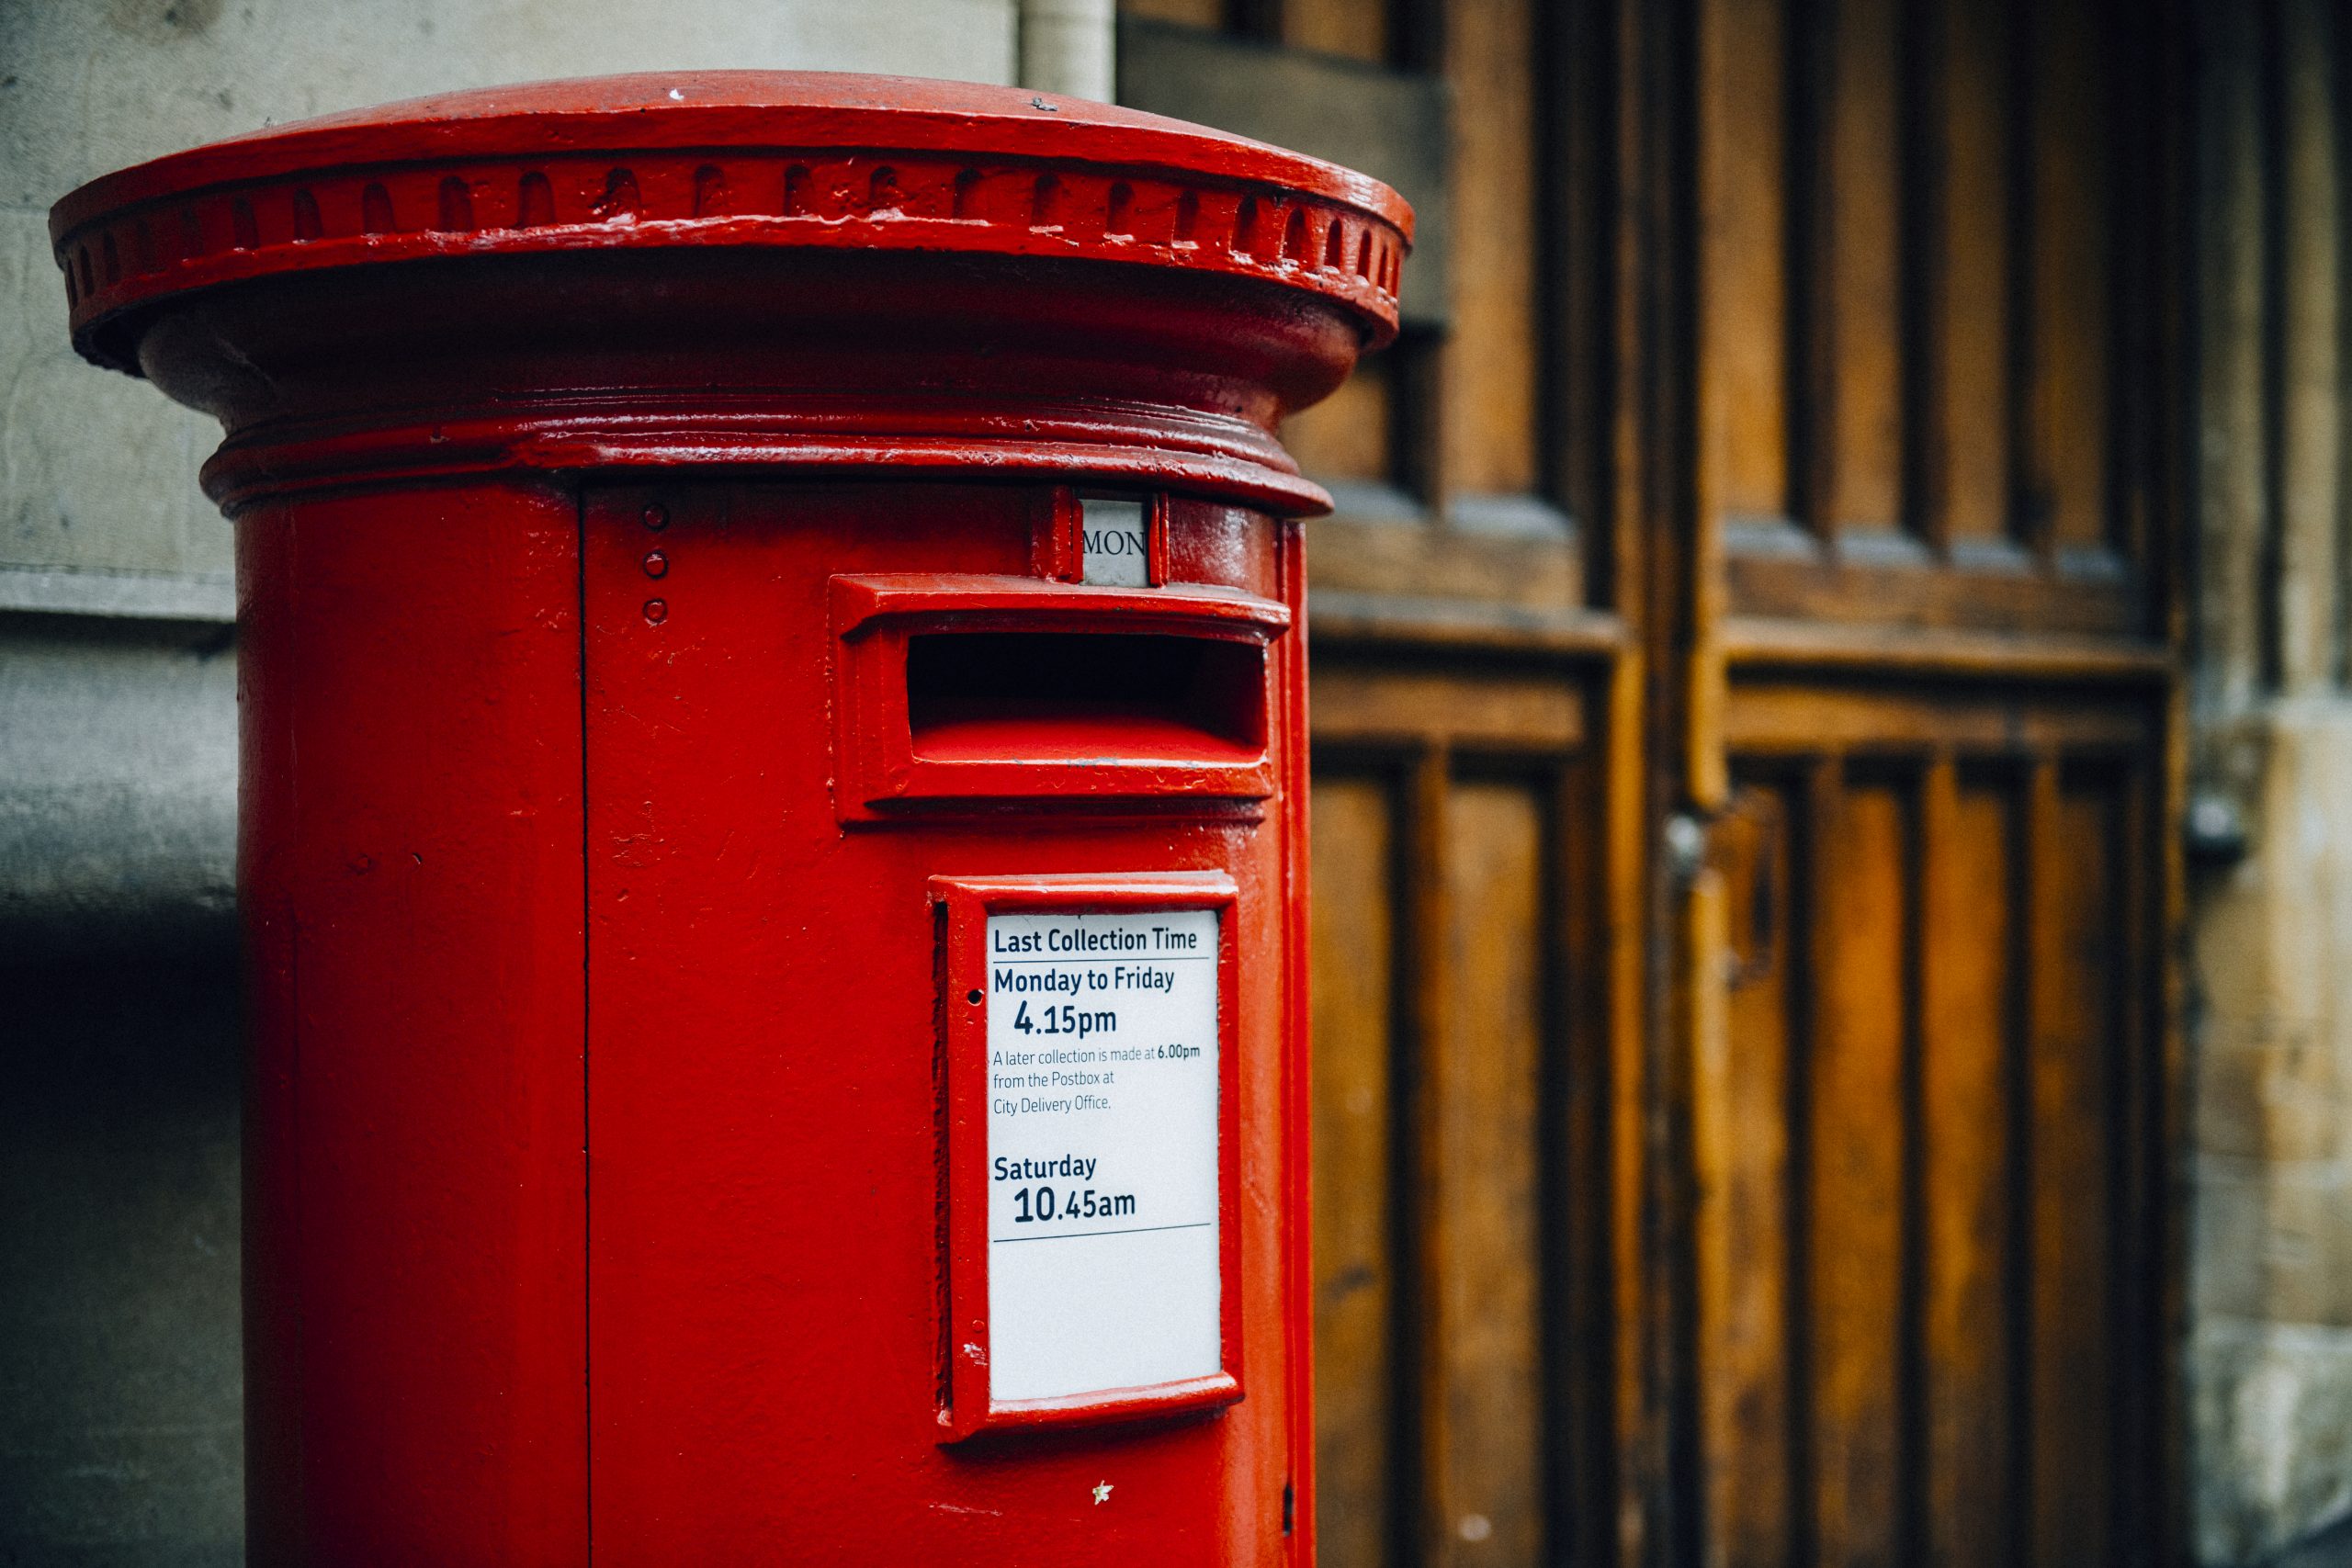 Iconic red British royal mail postbox